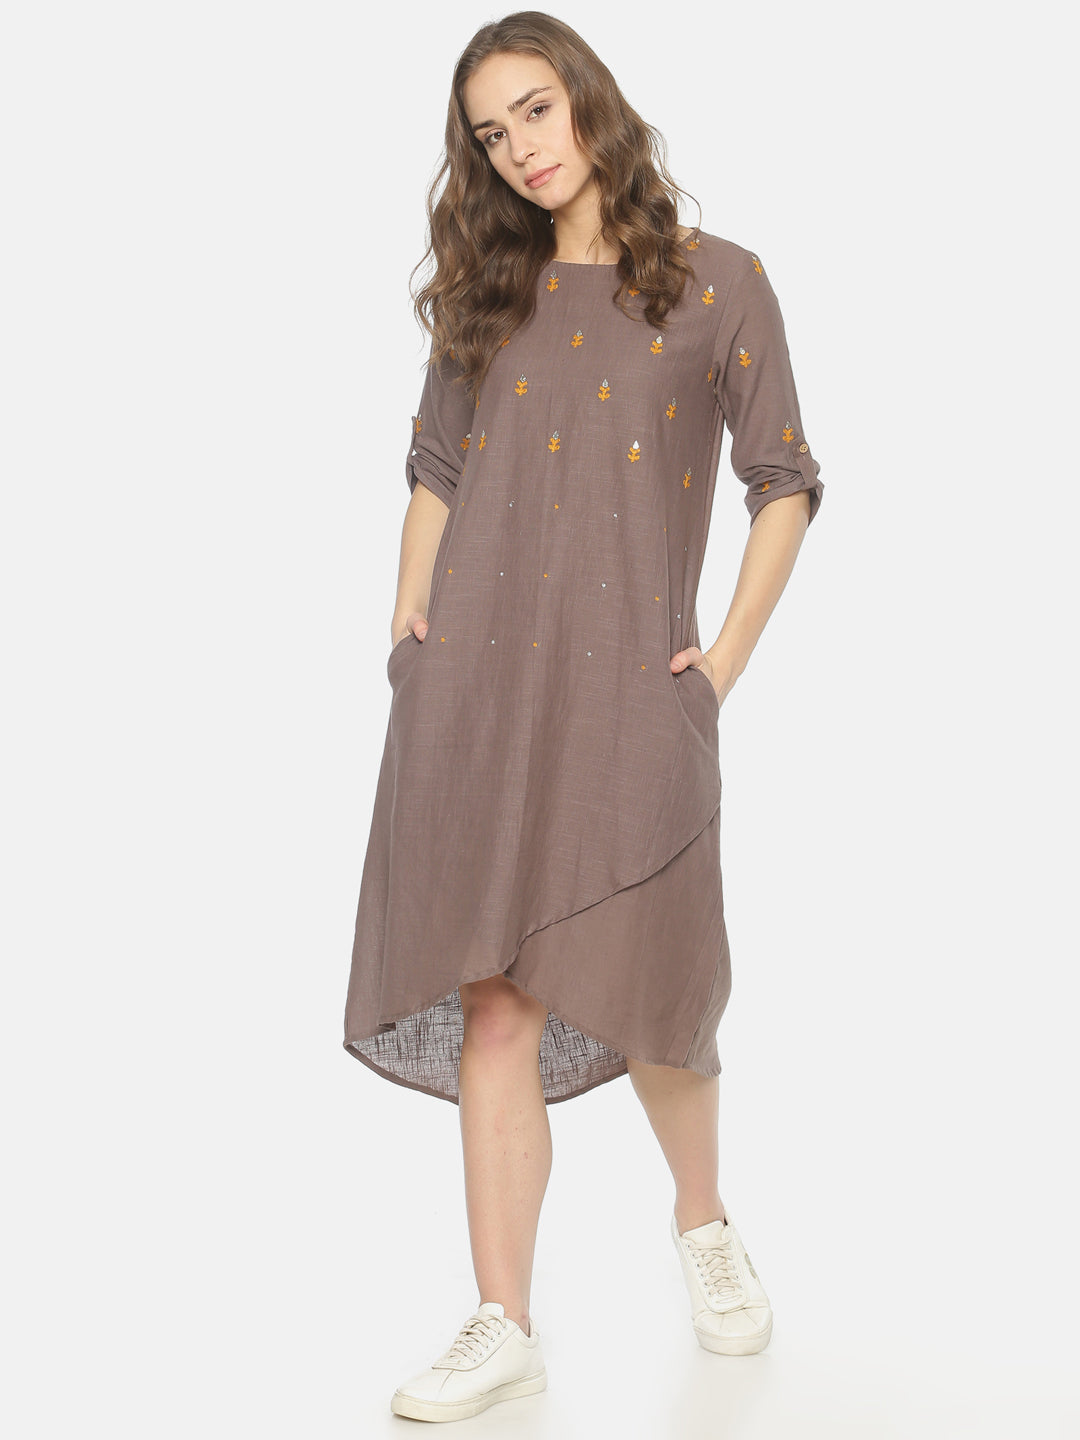 Grey Dress With Gota Embroidery | Untung